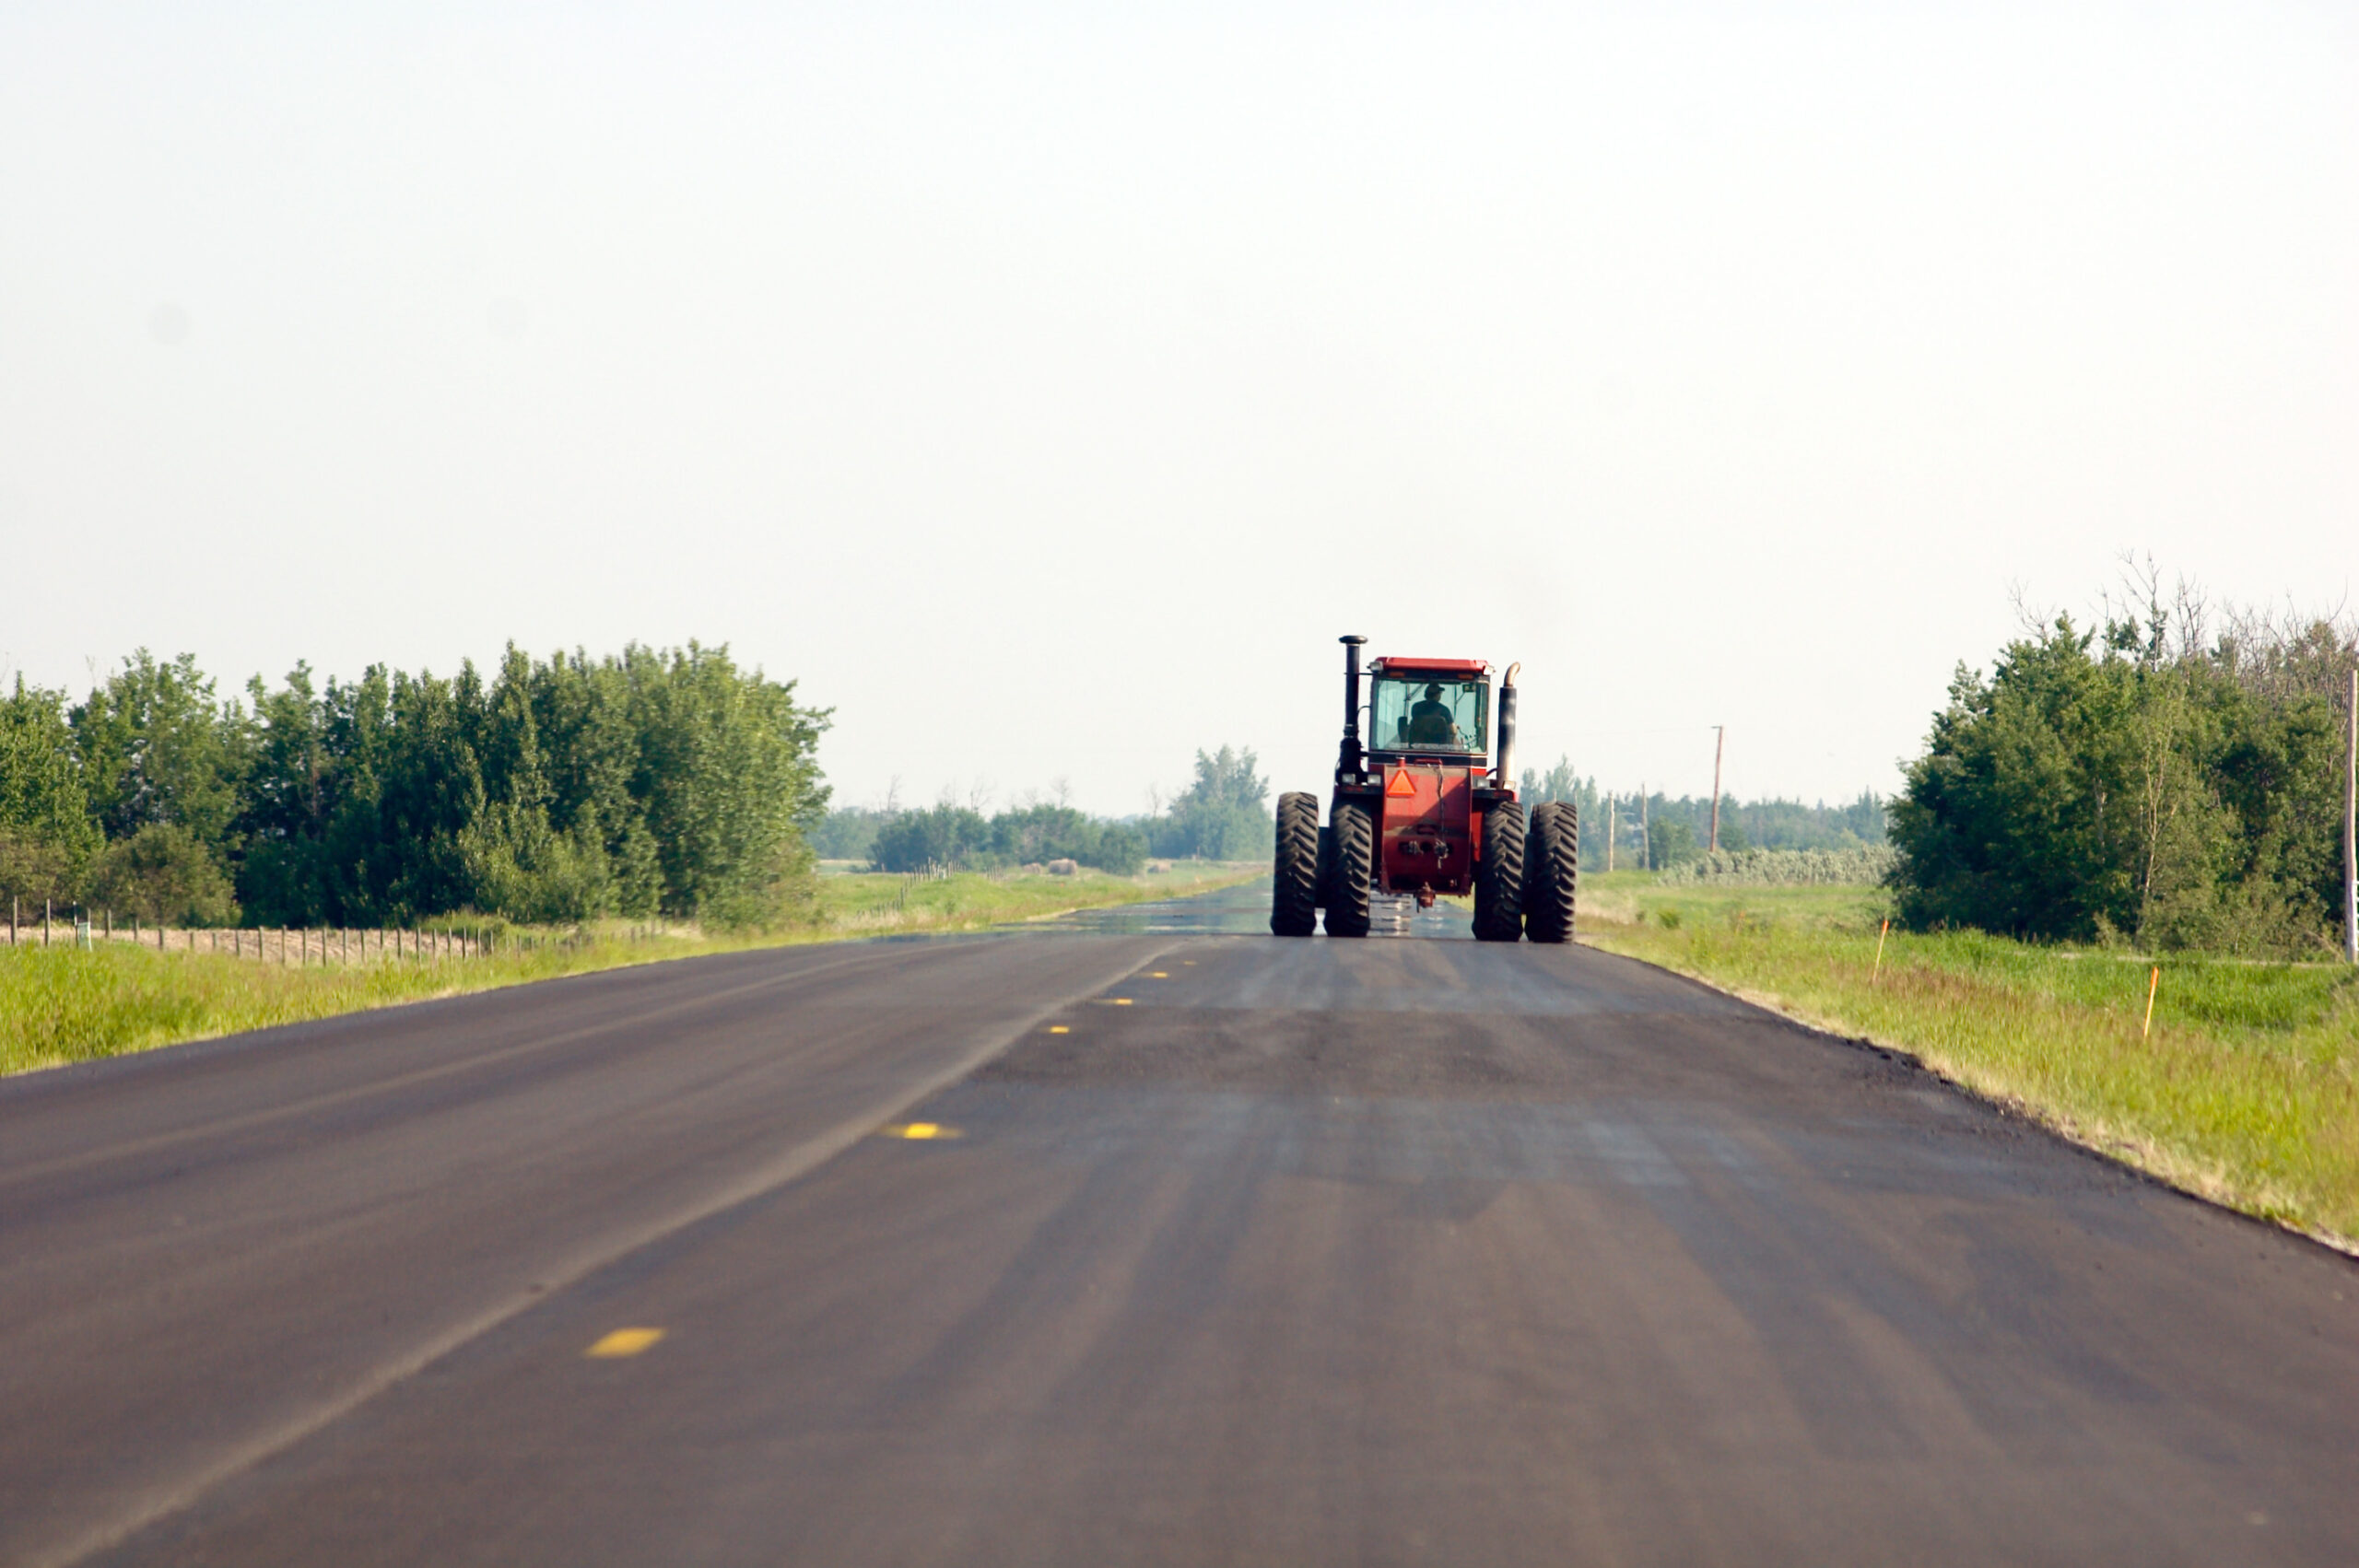 A large tractor going down a country road